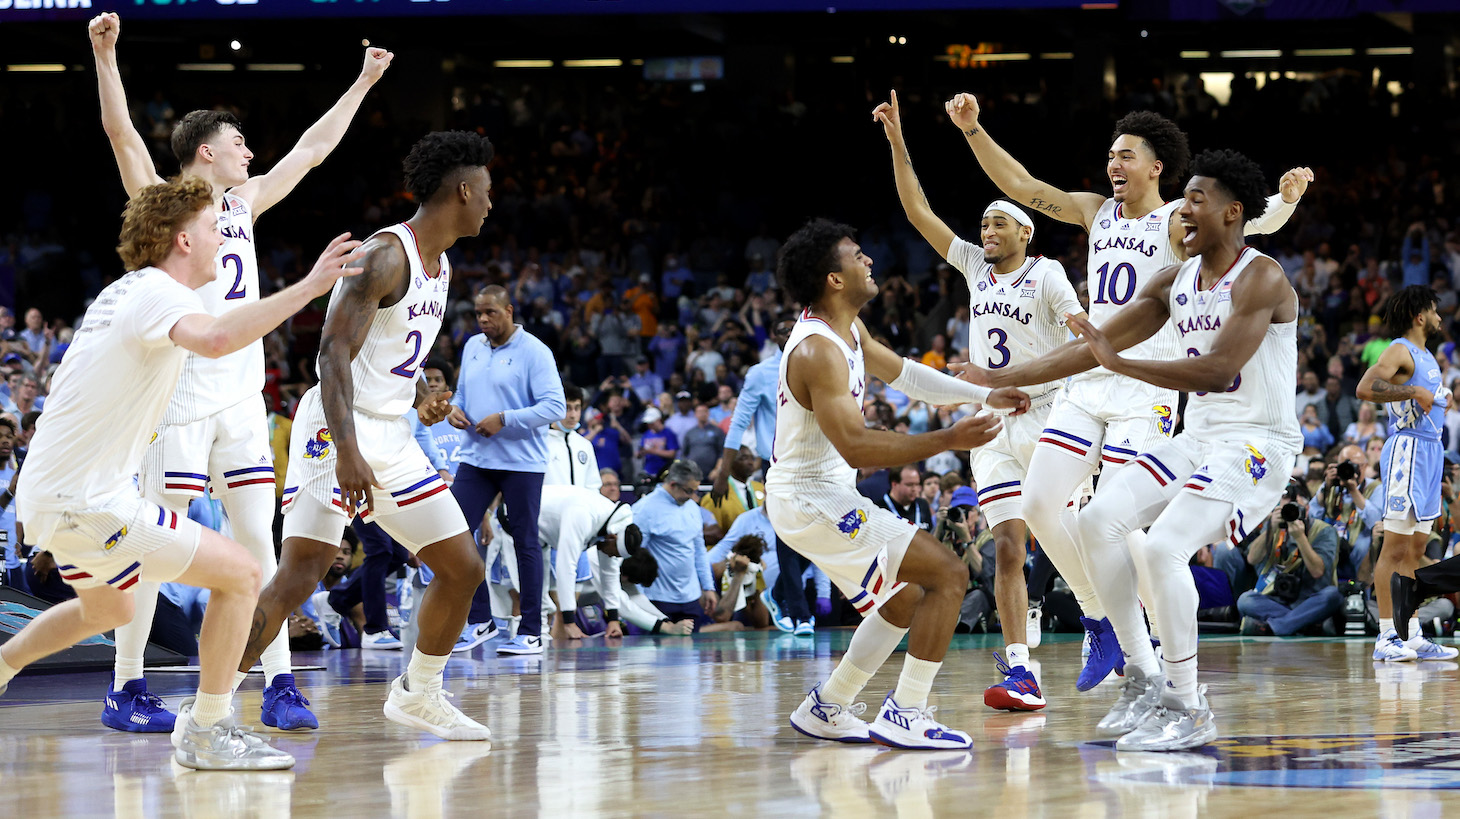 NEW ORLEANS, LOUISIANA - APRIL 04: The Kansas Jayhawks celebrate after defeating the North Carolina Tar Heels 72-69 during the 2022 NCAA Men's Basketball Tournament National Championship at Caesars Superdome on April 04, 2022 in New Orleans, Louisiana. (Photo by Jamie Squire/Getty Images)